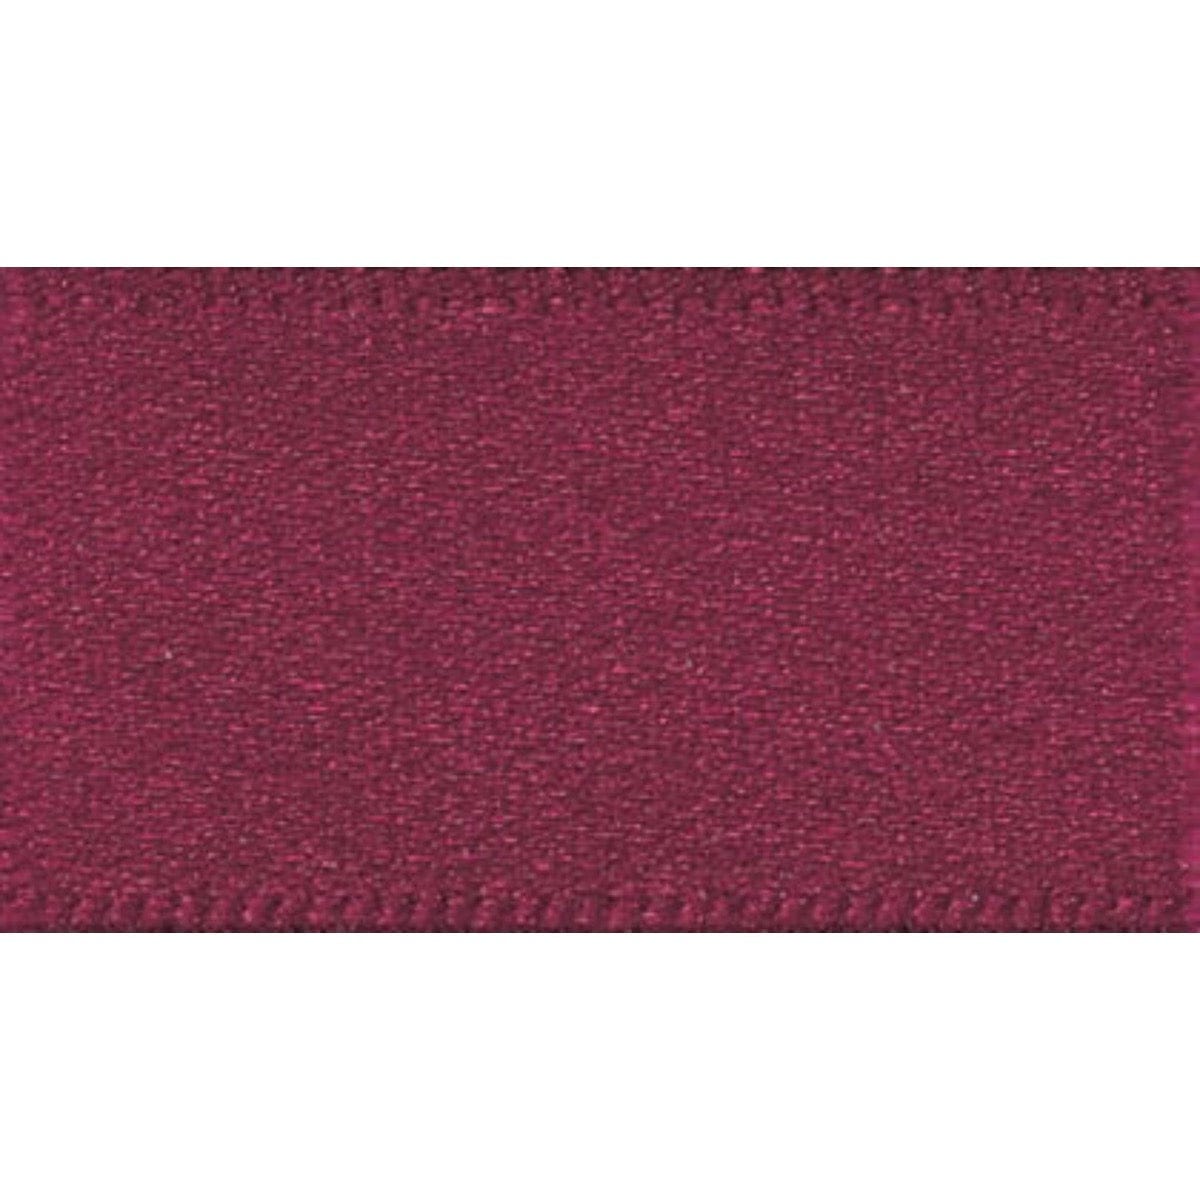 Double Faced Satin Ribbon Burgundy Red: 7mm wide. Price per metre.